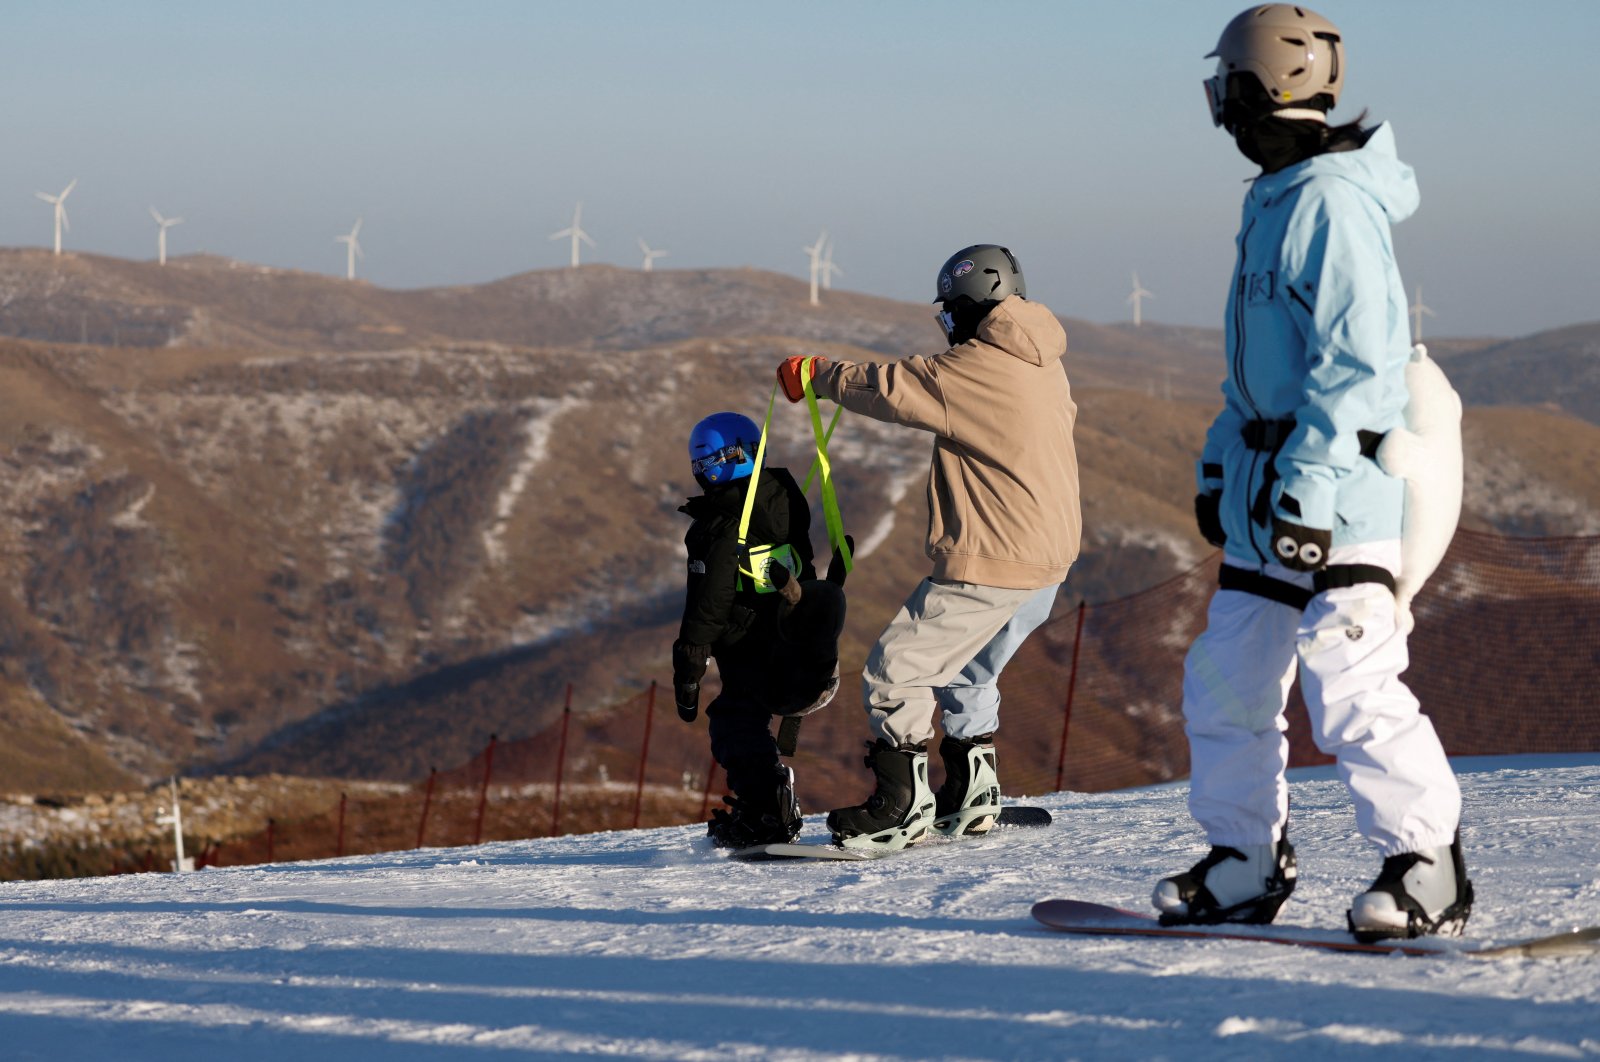 Wind turbines are seen on a slope behind visitors snowboarding at Genting Snow Park during a government-organized media tour to Beijing 2022 Winter Olympics venues, Zhangjiakou, China, Dec. 21, 2021. (Reuters Photo)